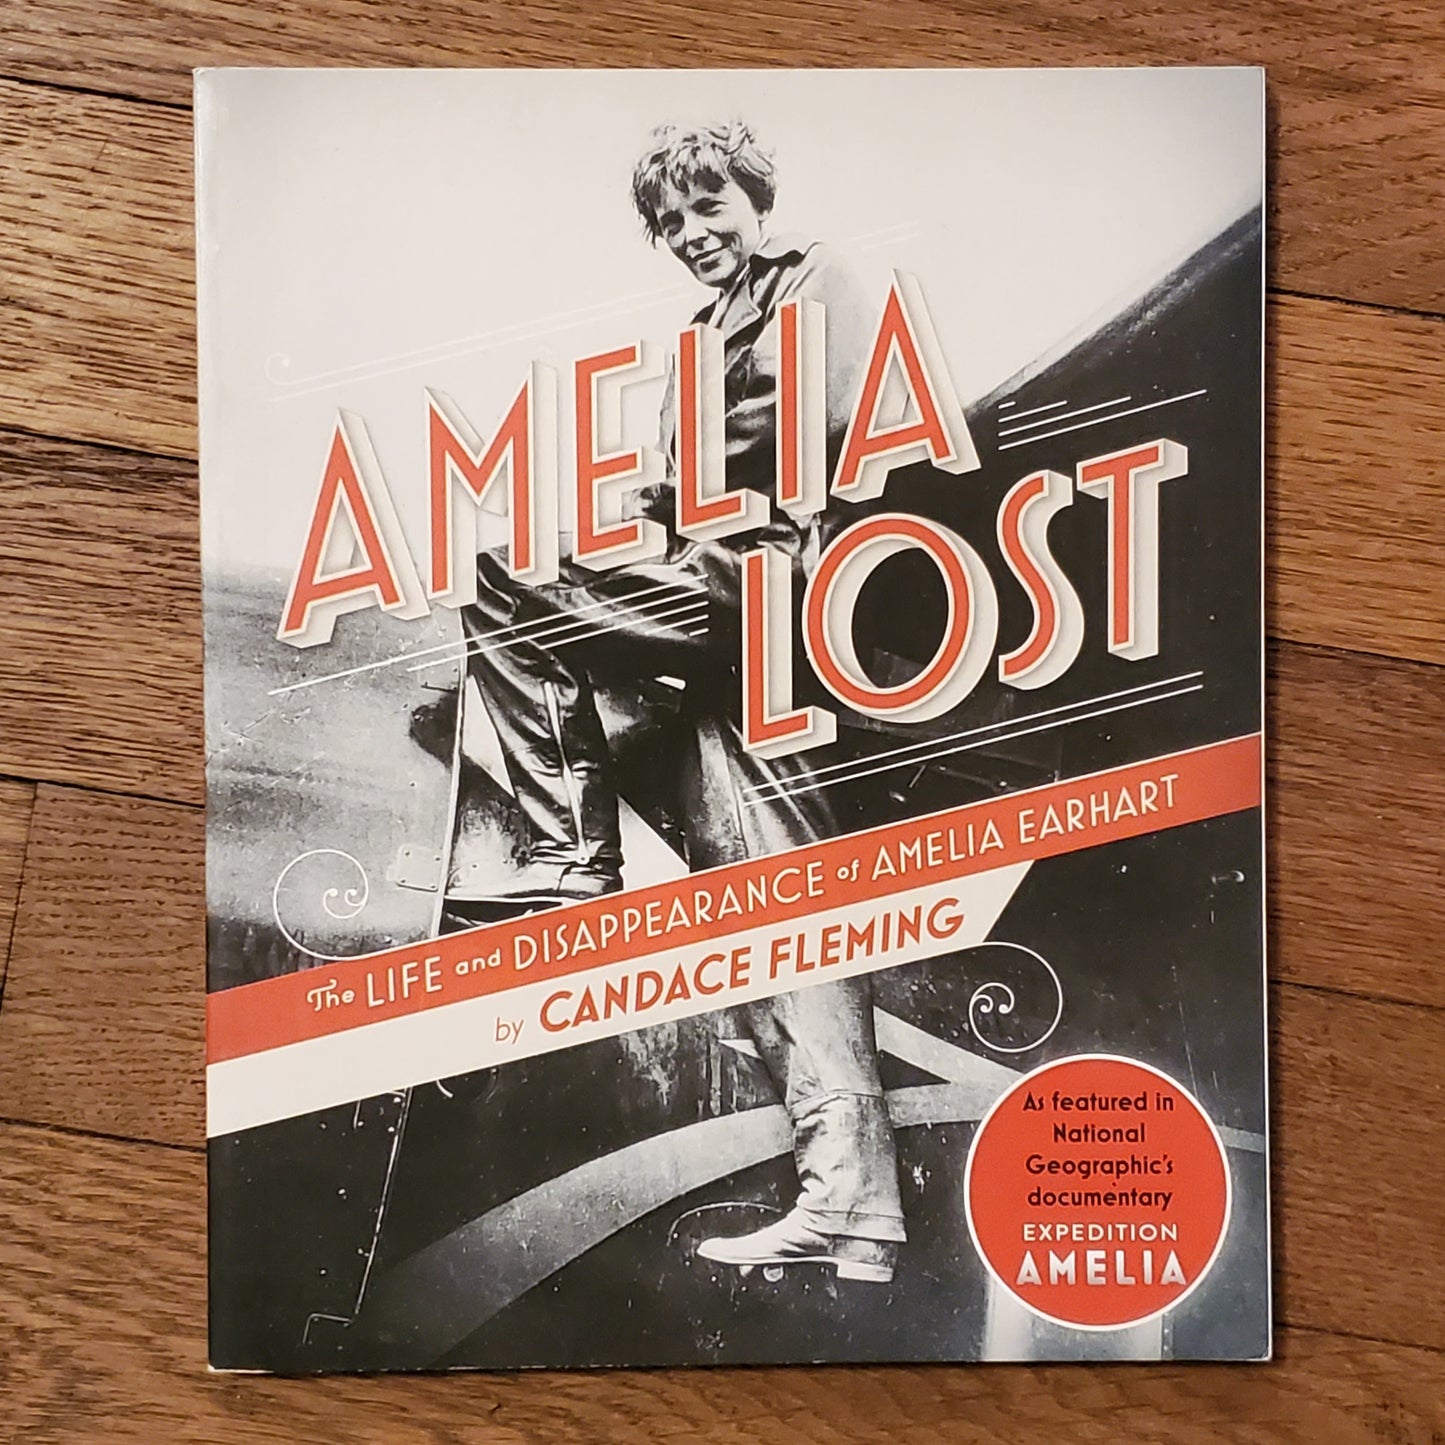 GB Amelia Lost: The Life and Disappearance of Amelia Earhart